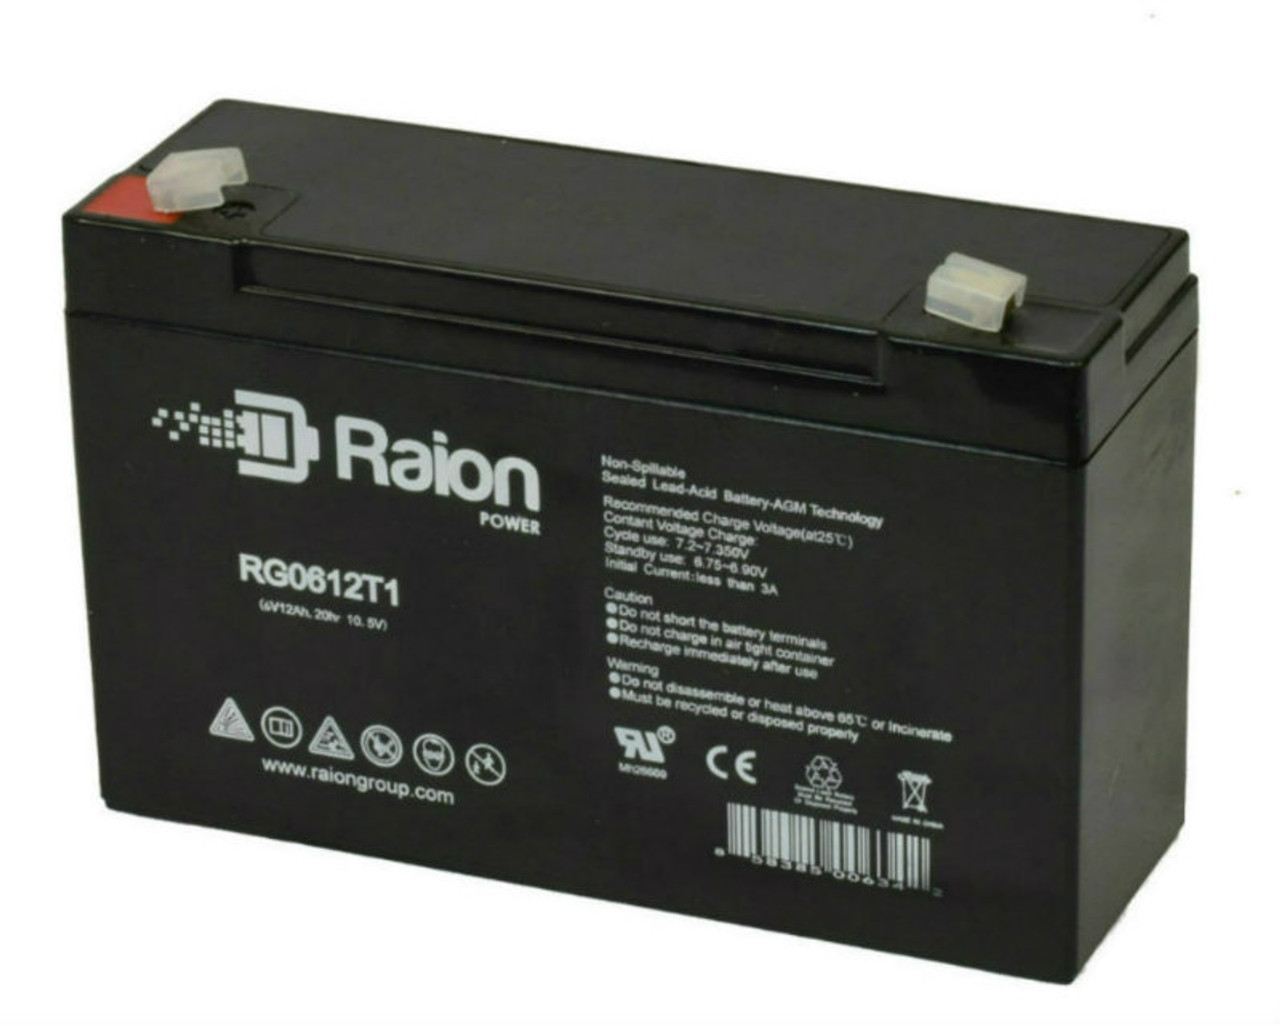 Raion Power RG06120T1 Replacement Battery for MATRIX NP10-6